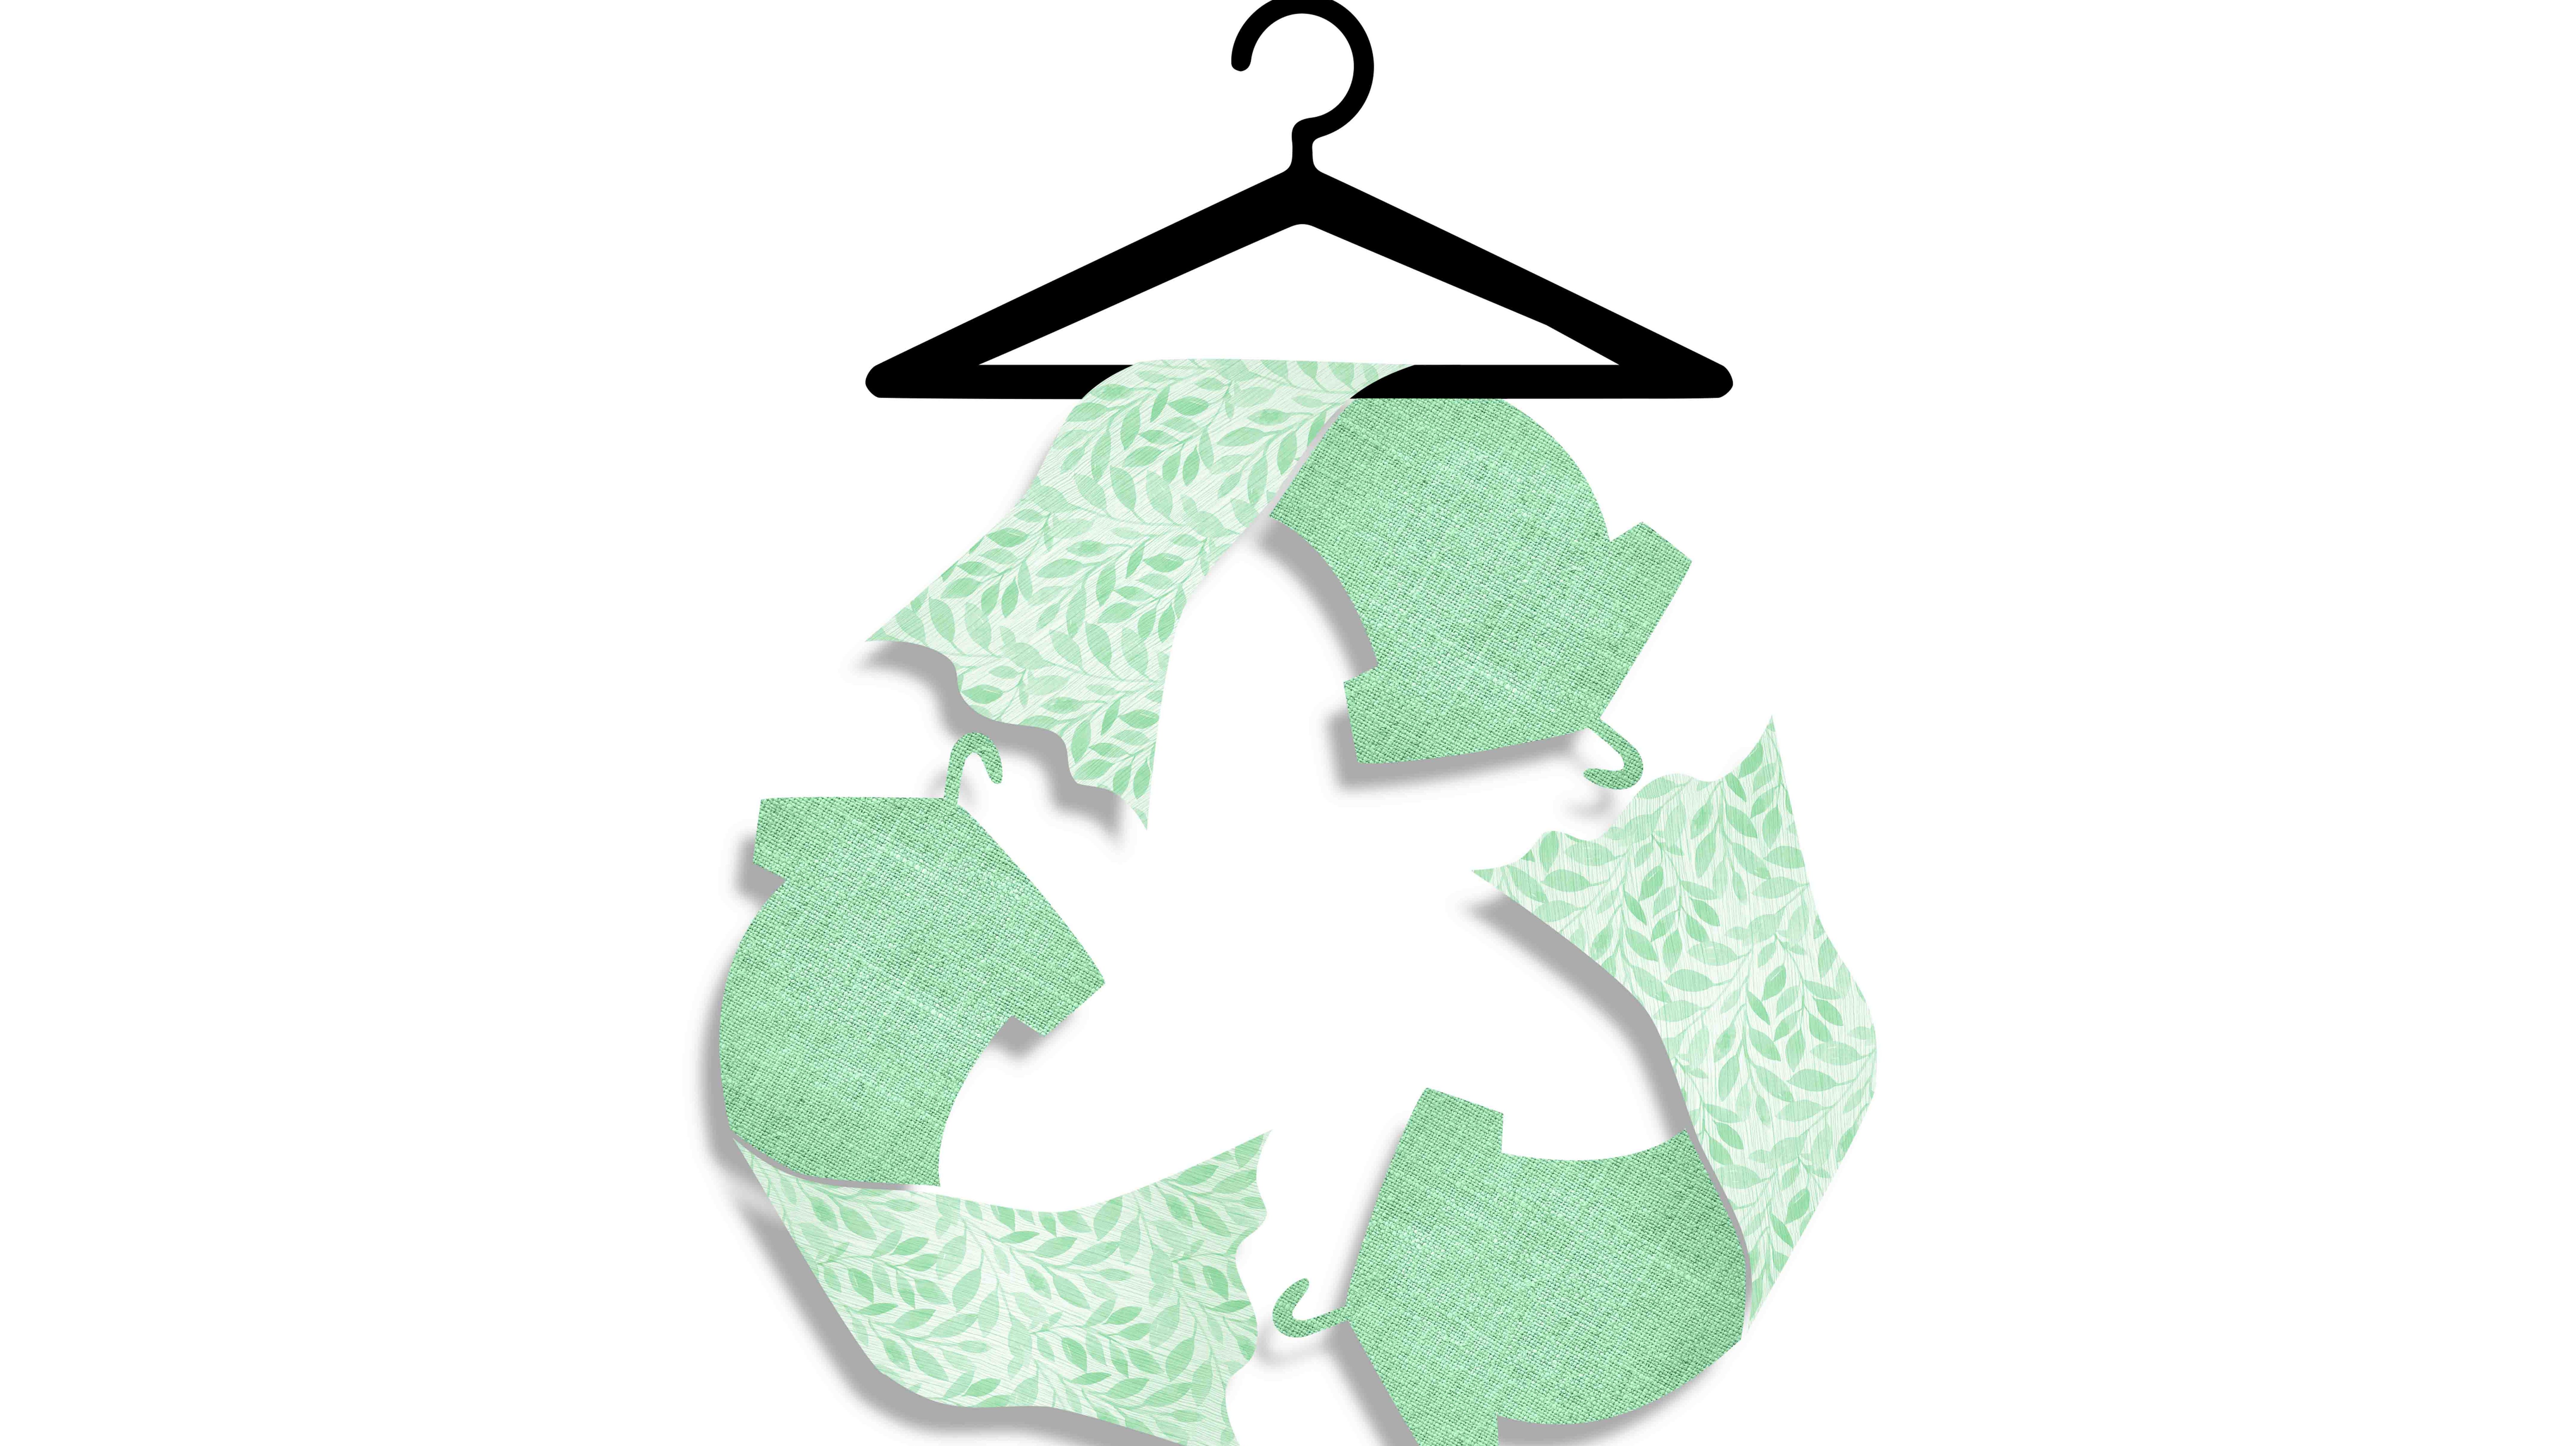 Recycle clothes icons textured with recycled fabric on hanger, sustainable fashion to reduce waste concept